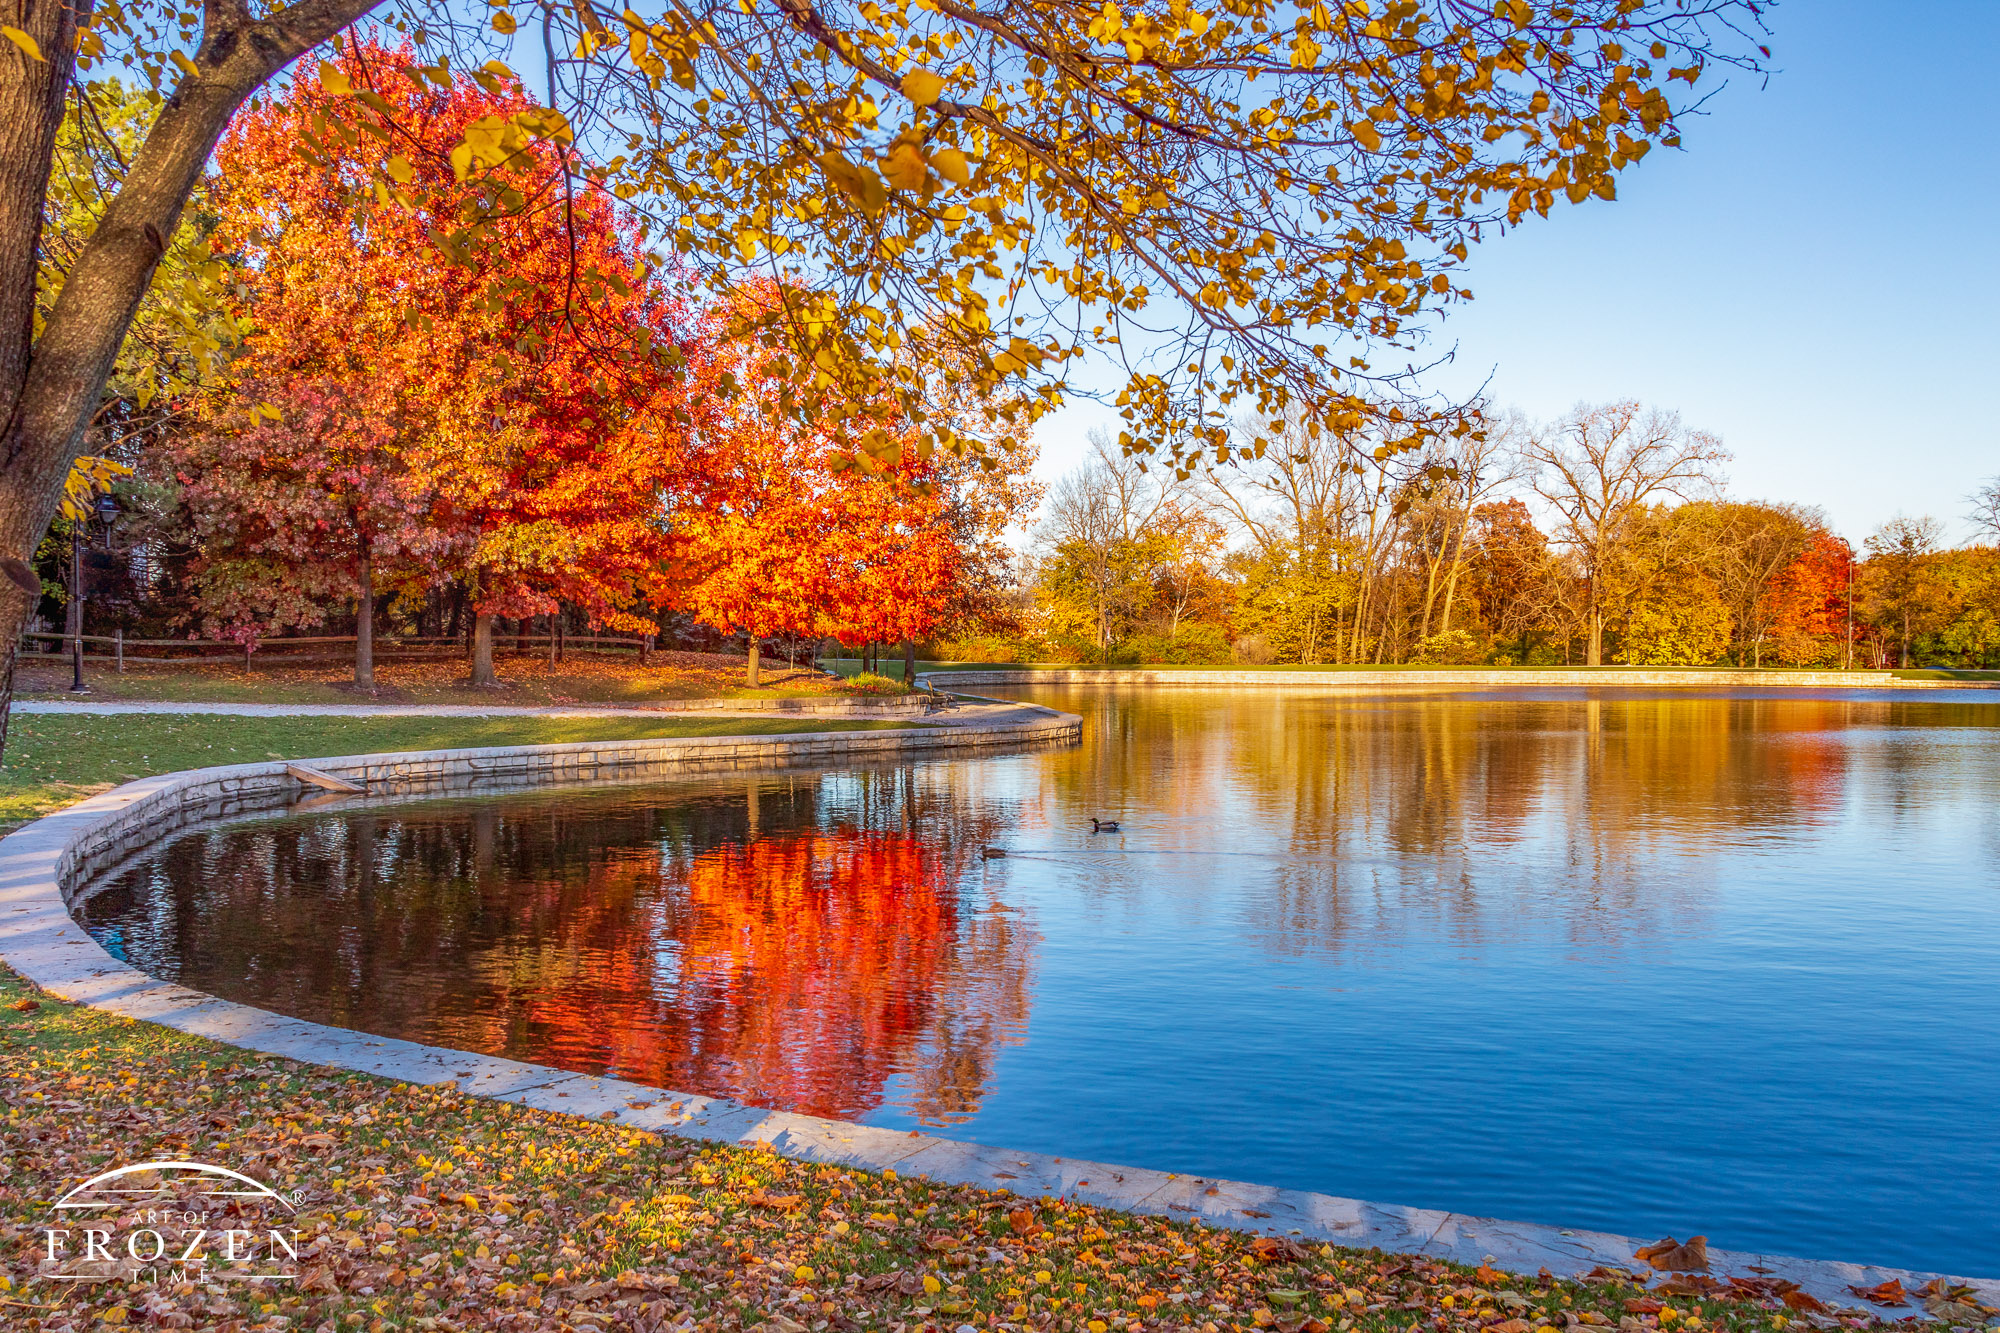 As autumn at peak color around Kettering’s Lincoln Park Pond, the setting sun painted the scene in golden light.